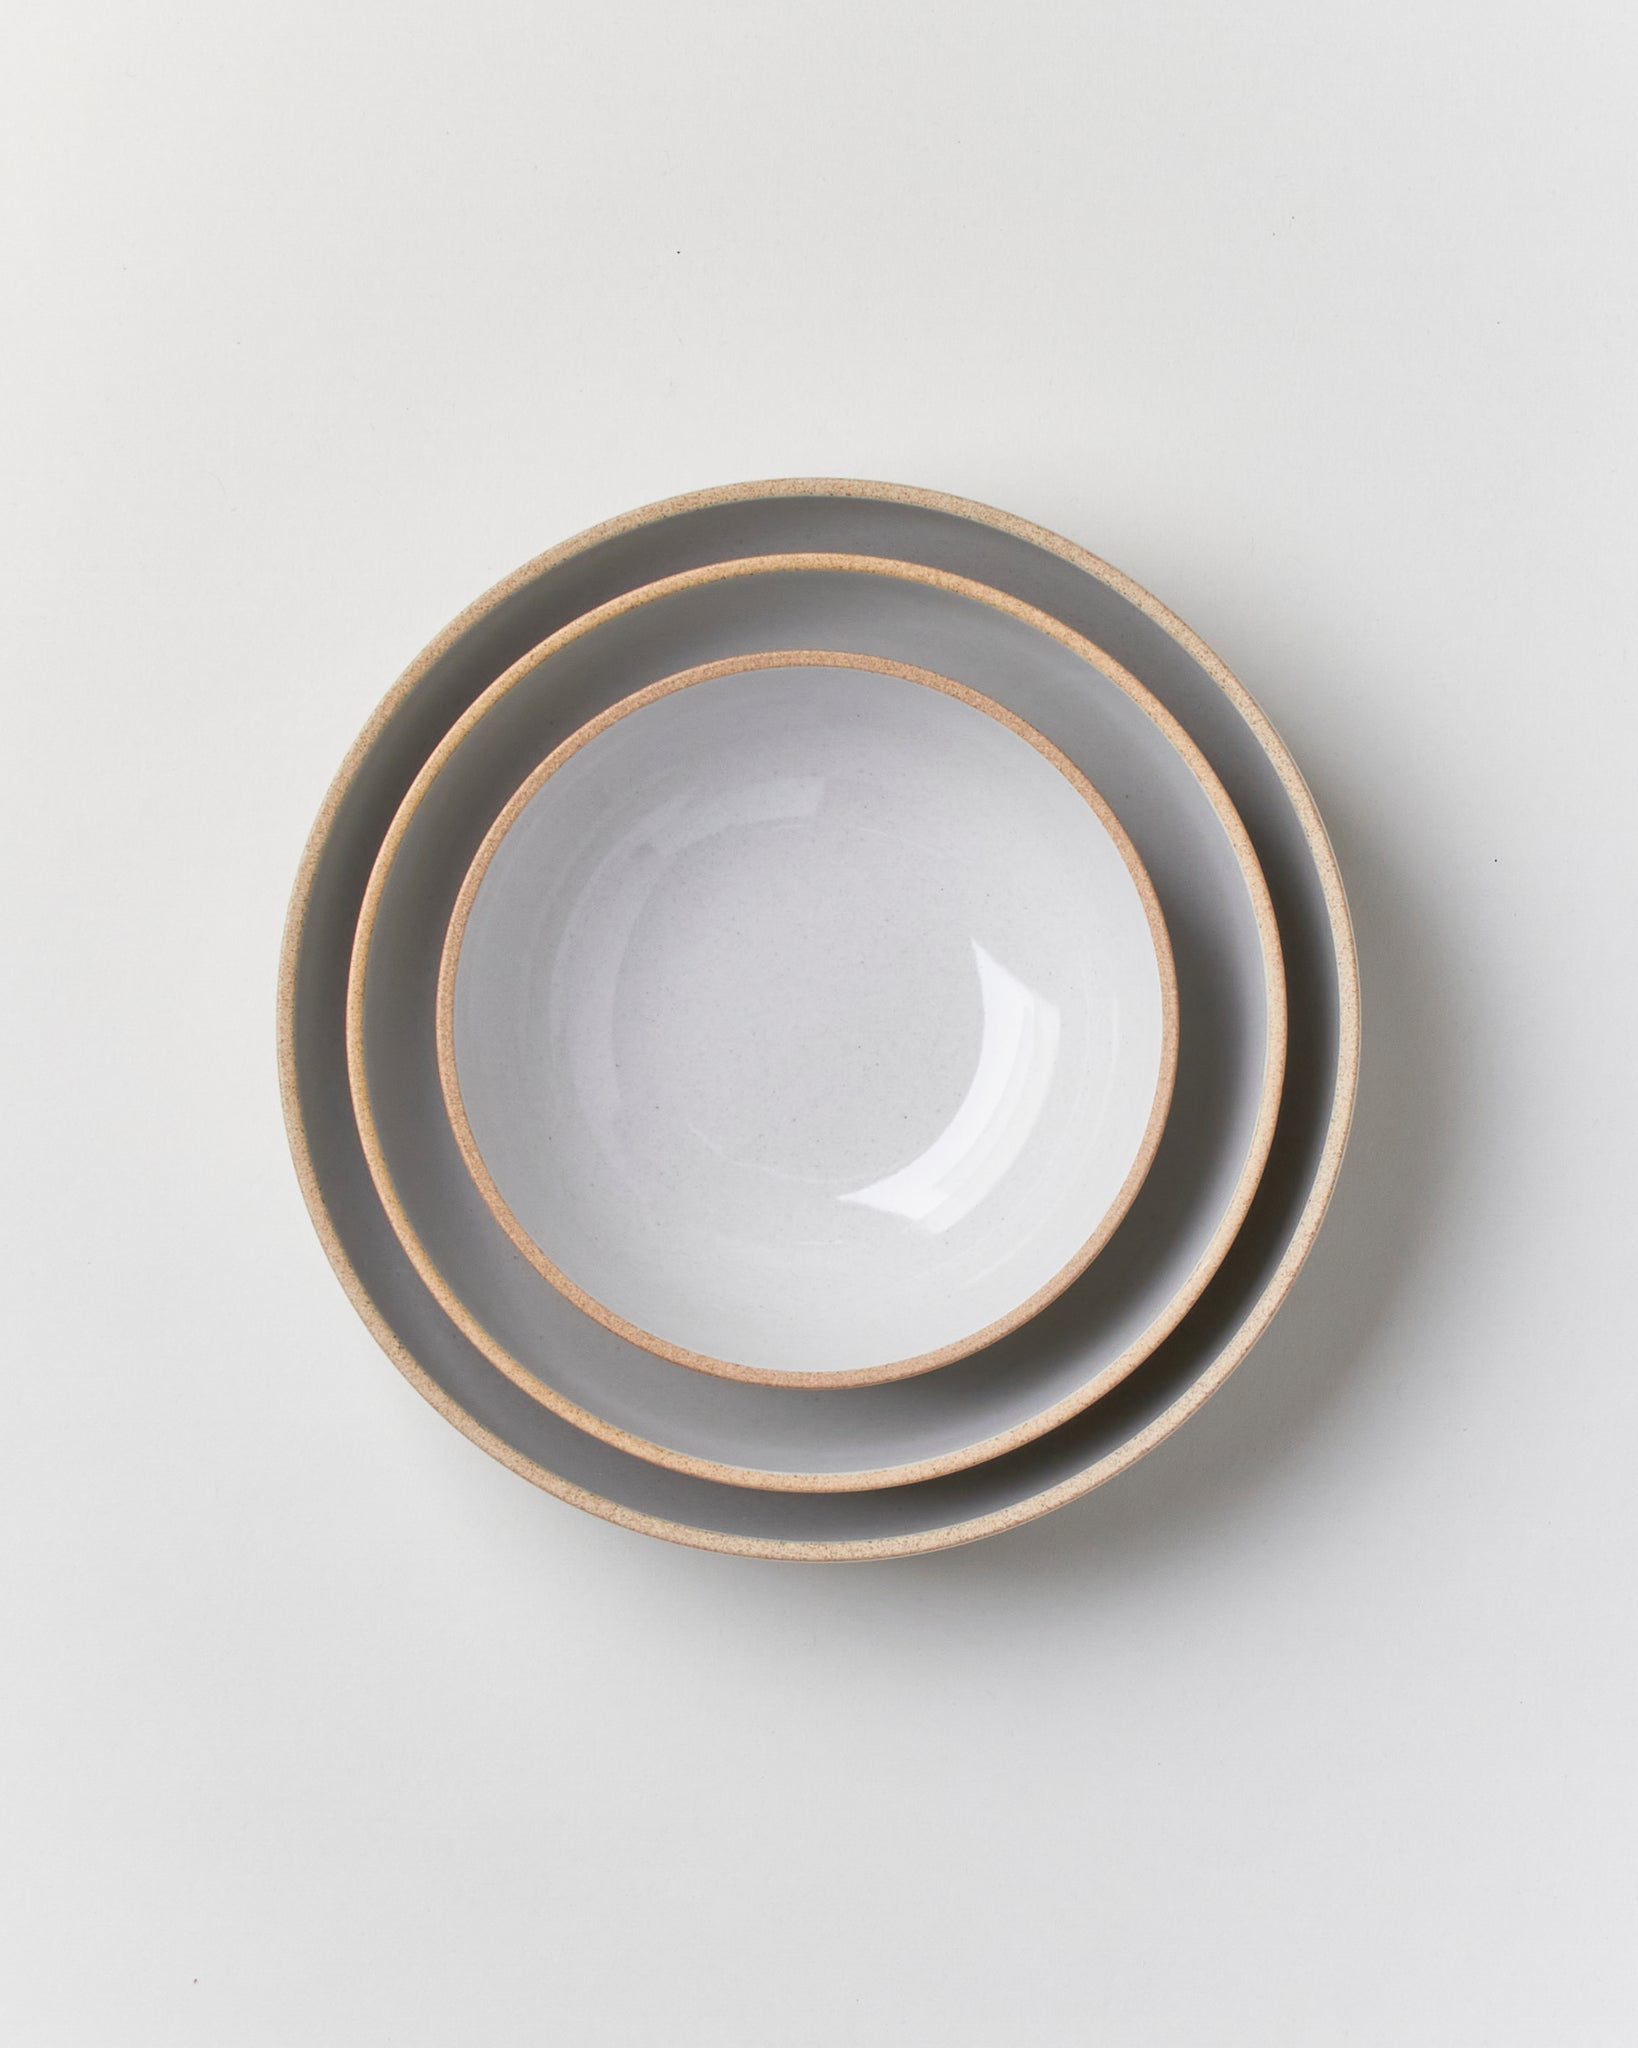 Hasami 8 5/8-inch Round Bowl in Gloss Grey